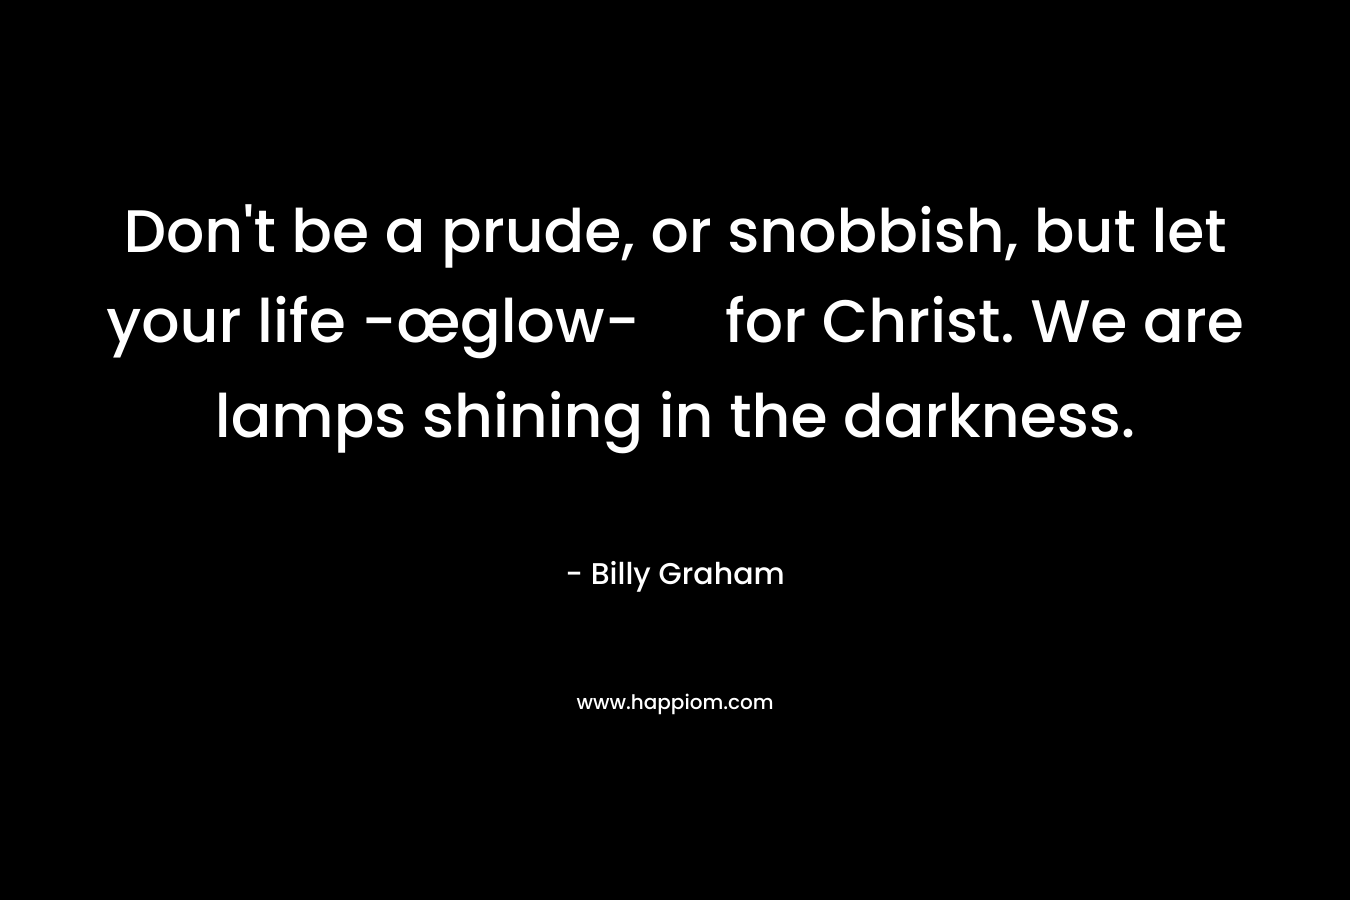 Don't be a prude, or snobbish, but let your life -œglow- for Christ. We are lamps shining in the darkness.